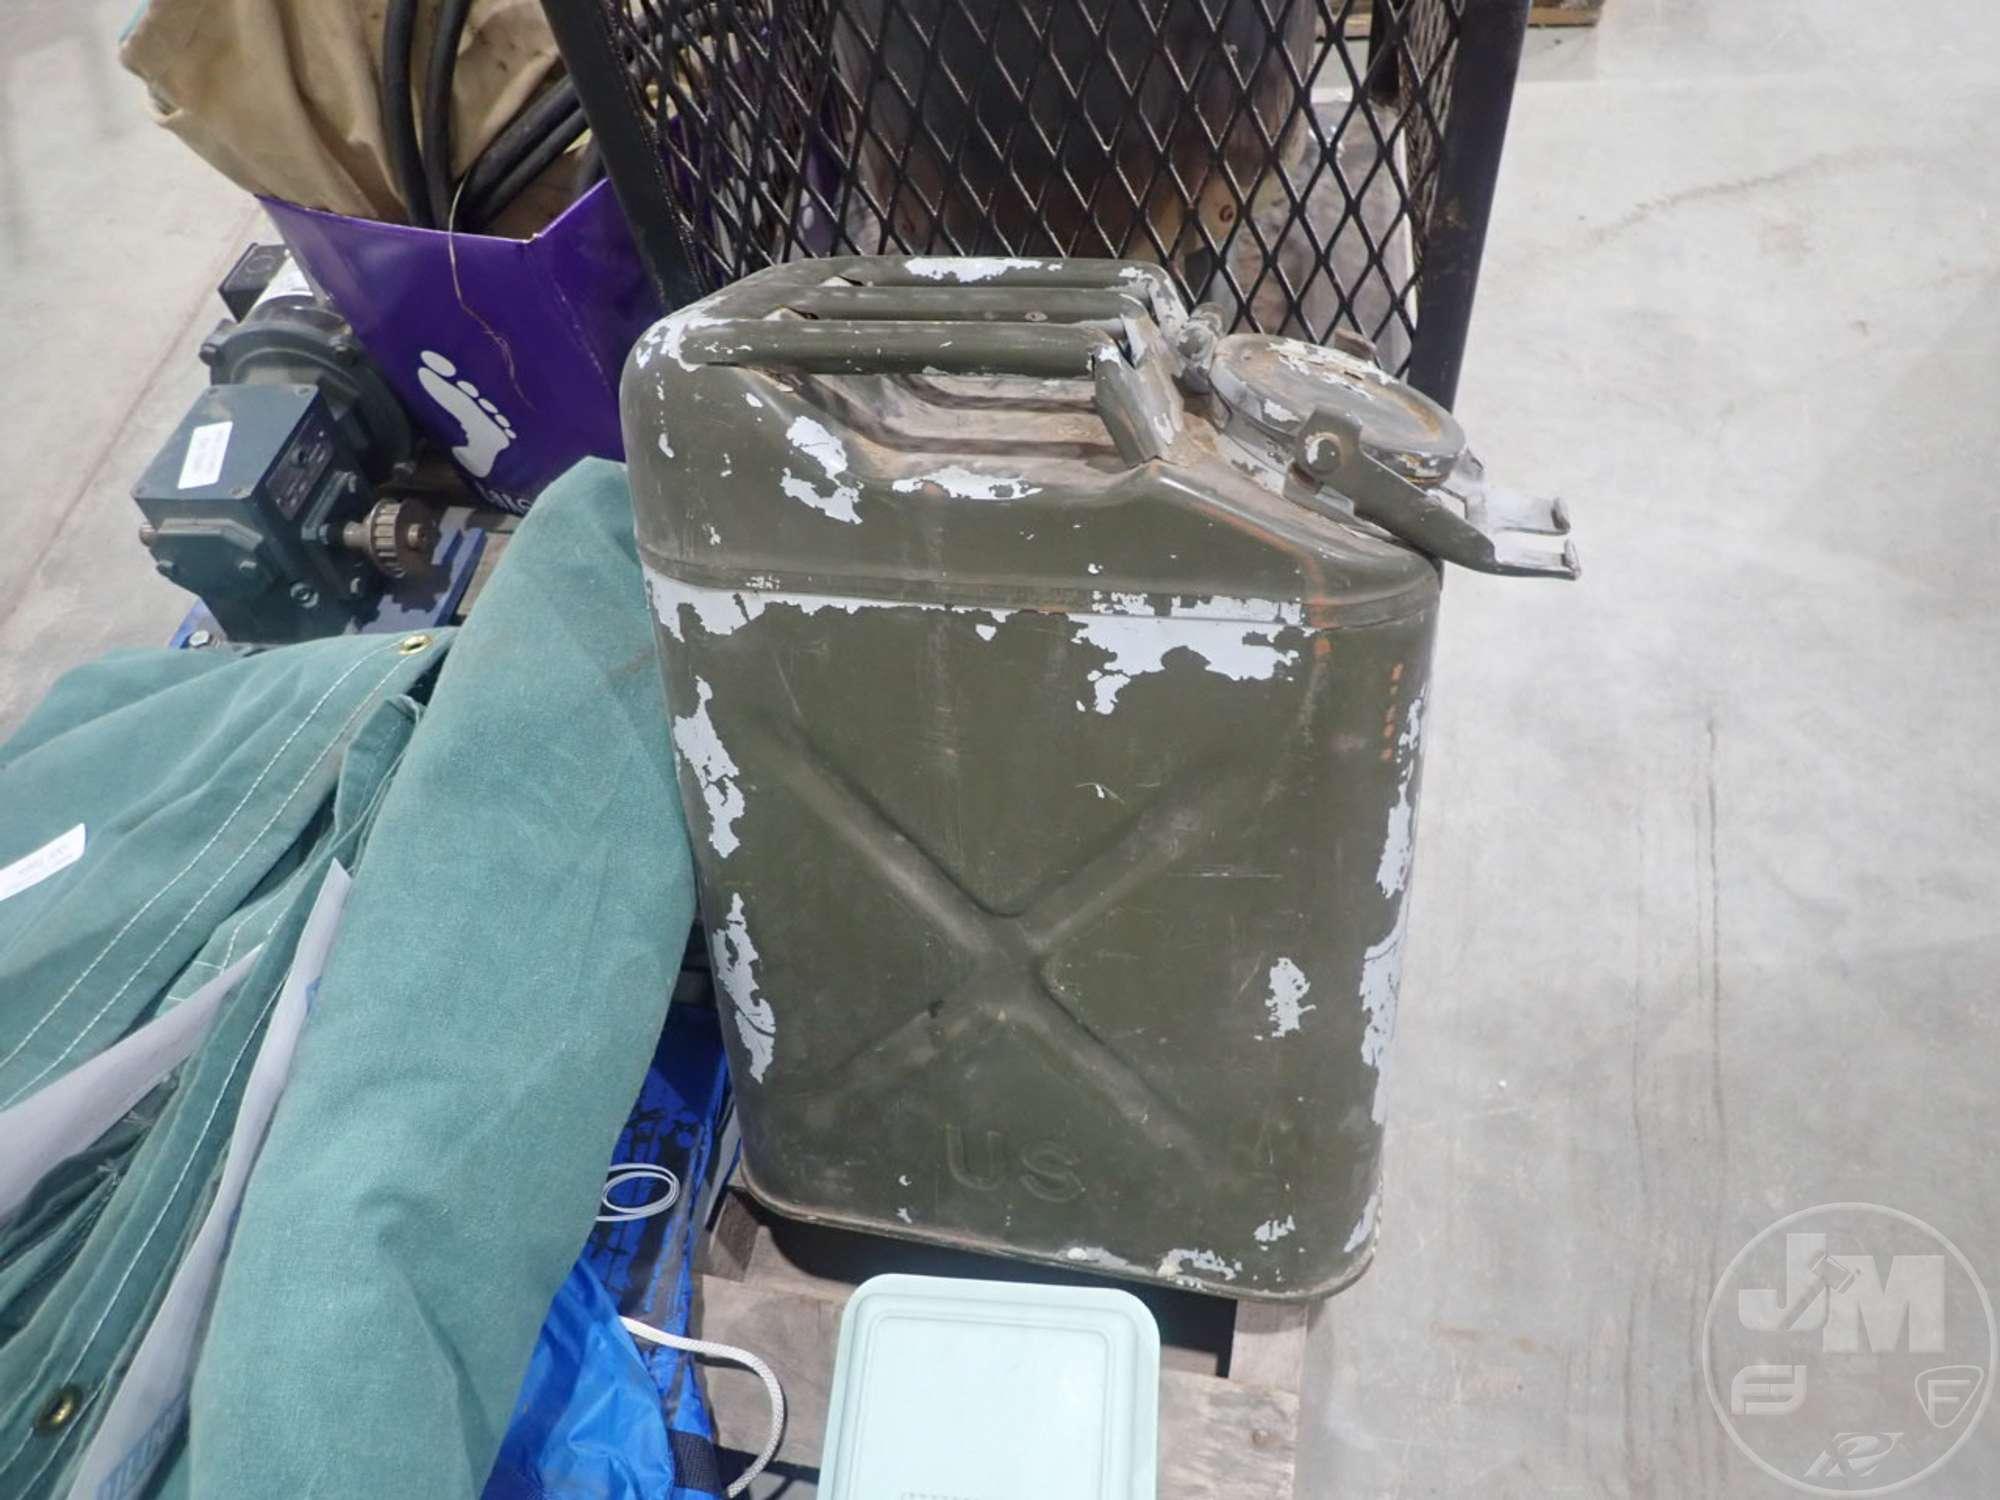 TARP, GERRY CAN, BOY SCOUT TRAIL TENT, NATURAL GAS HEATER,